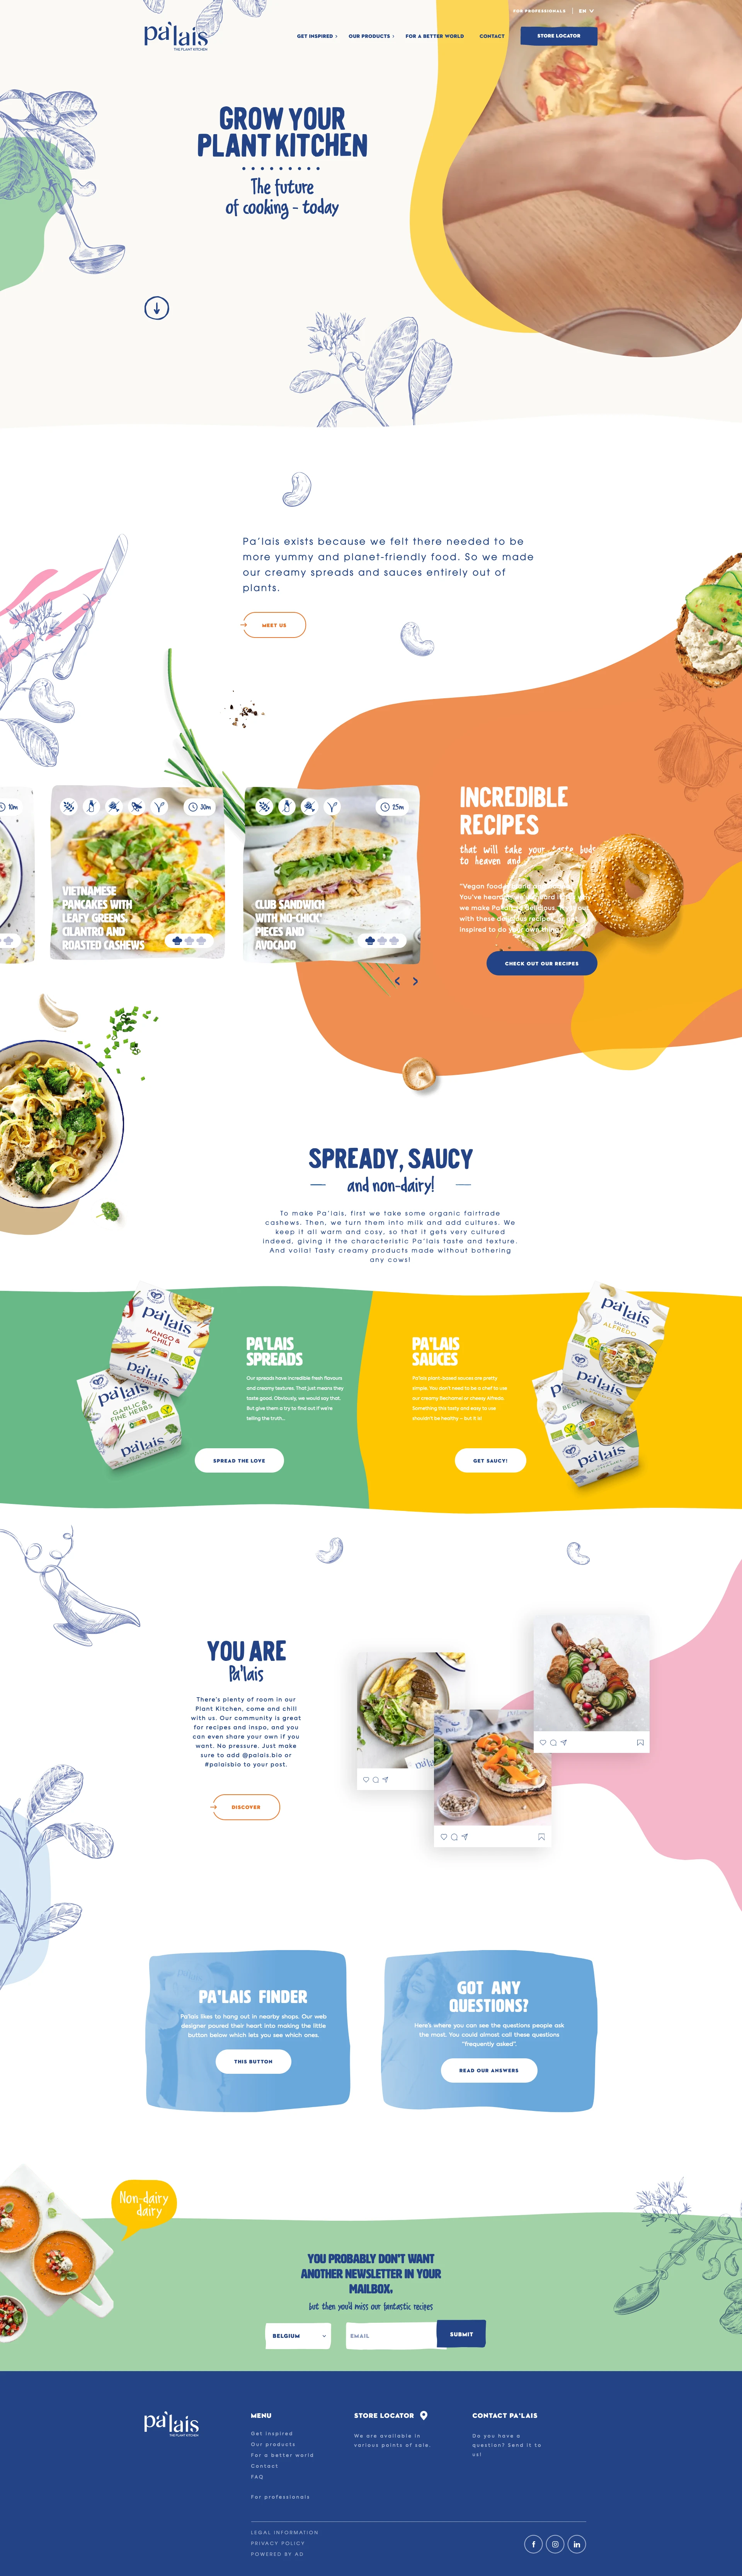 Pa'lais Landing Page Example: Discover our vegan spread-cheeses and sauces made entirely out of plants. Lactose-free, gluten-free, soy-free, sugar-free and additive-free.